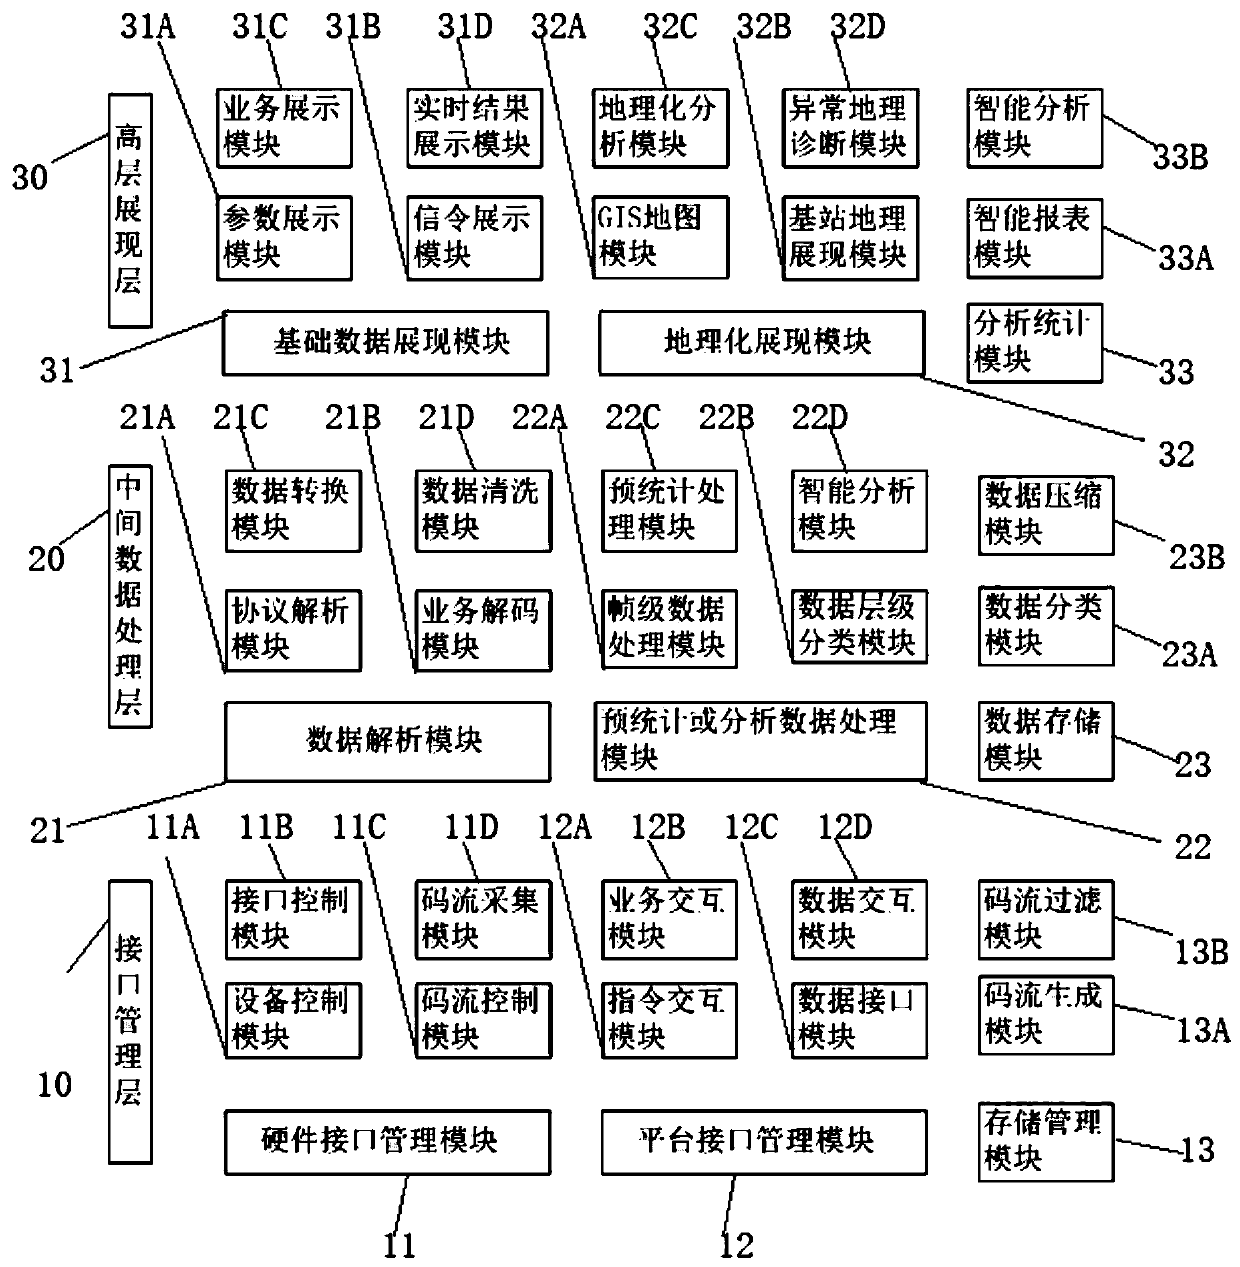 Power wireless private network drive test acquisition and analysis system and method